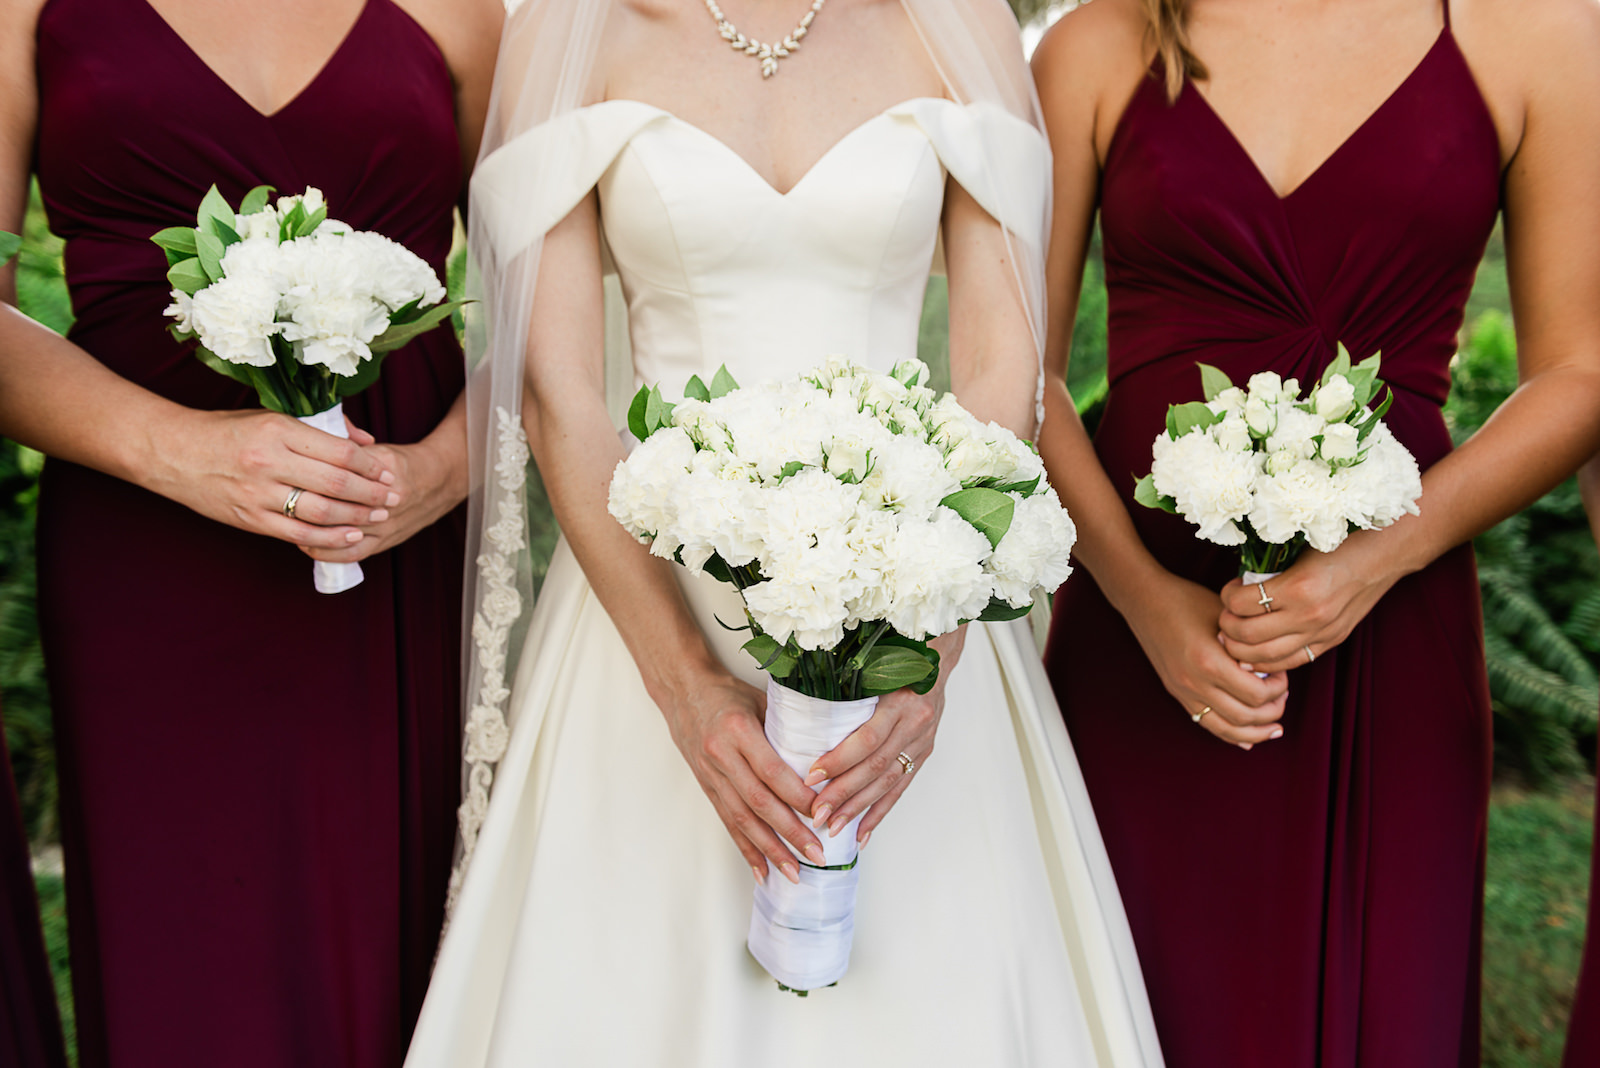 Bridesmaids in Wine Colored Dresses and White Bouquets with Bride Wedding Portrait | Florida Wedding Photographer Joyelan Photography